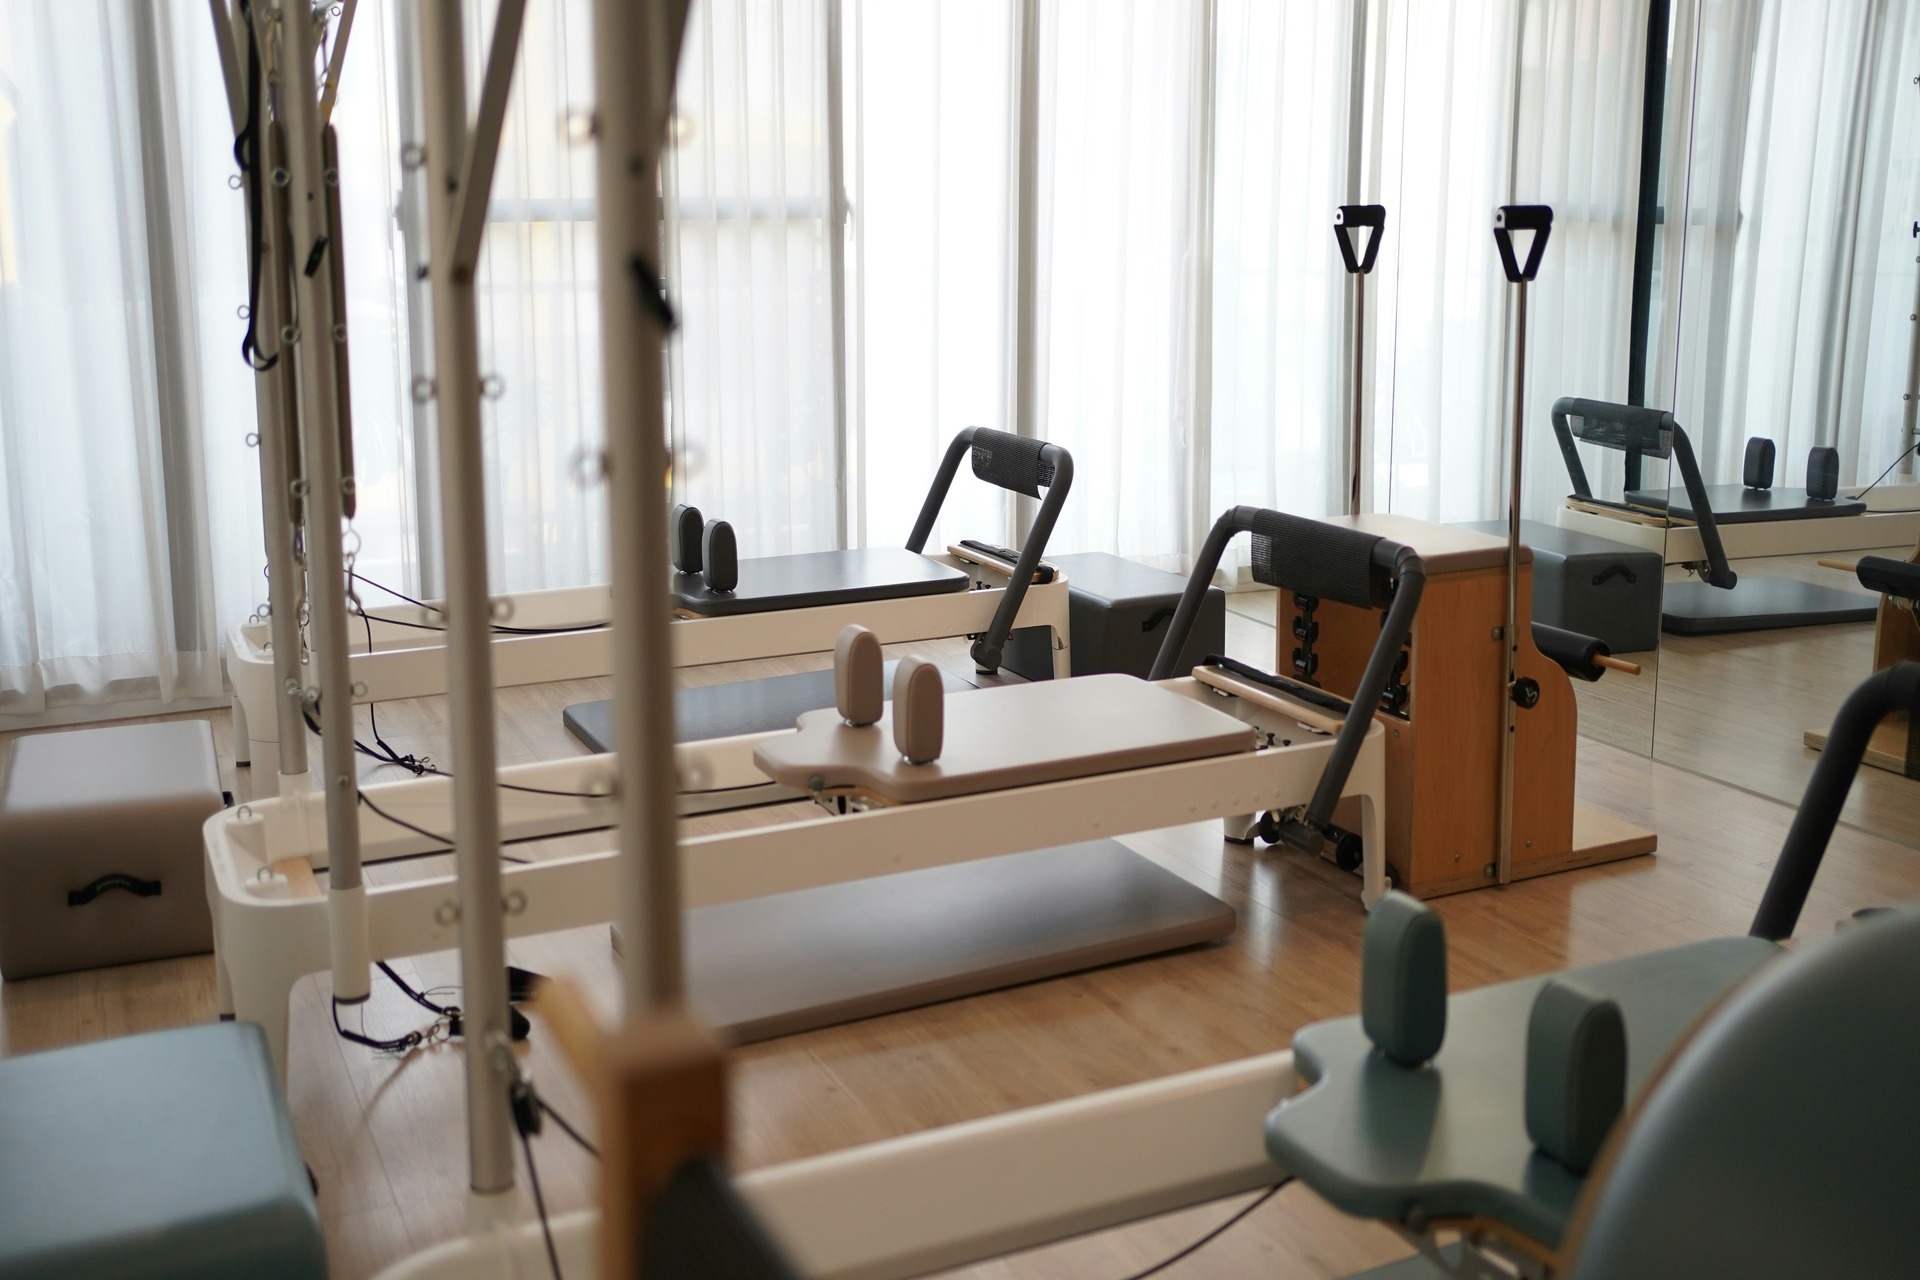 Pilates workout equipment in a studio